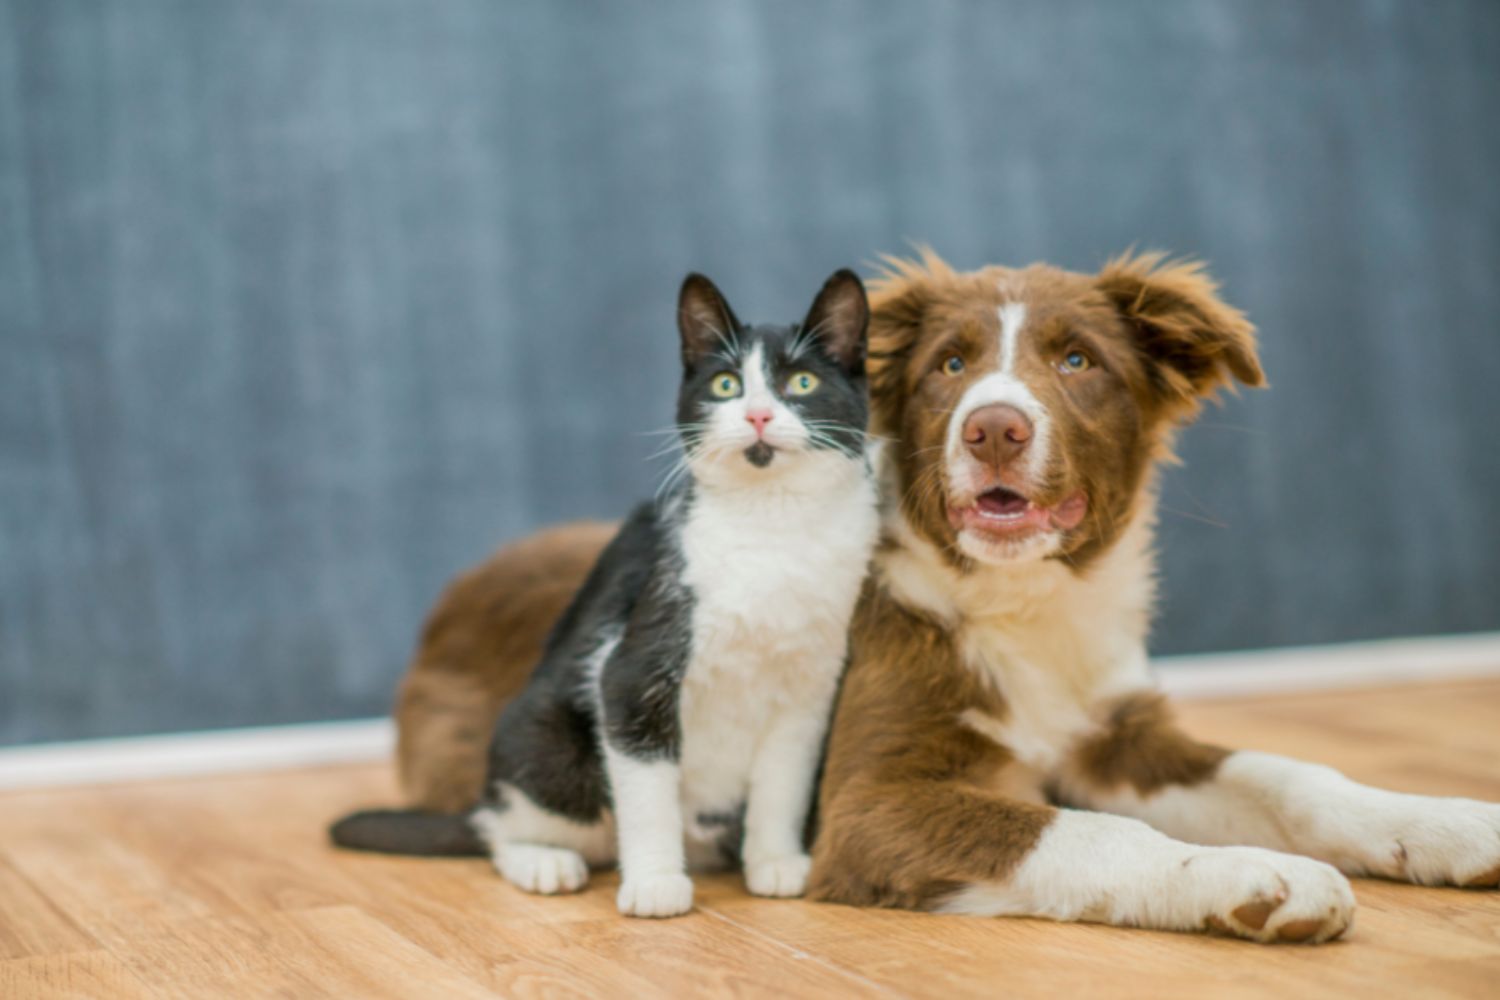 Black and white cat sitting next to a brown and white dog